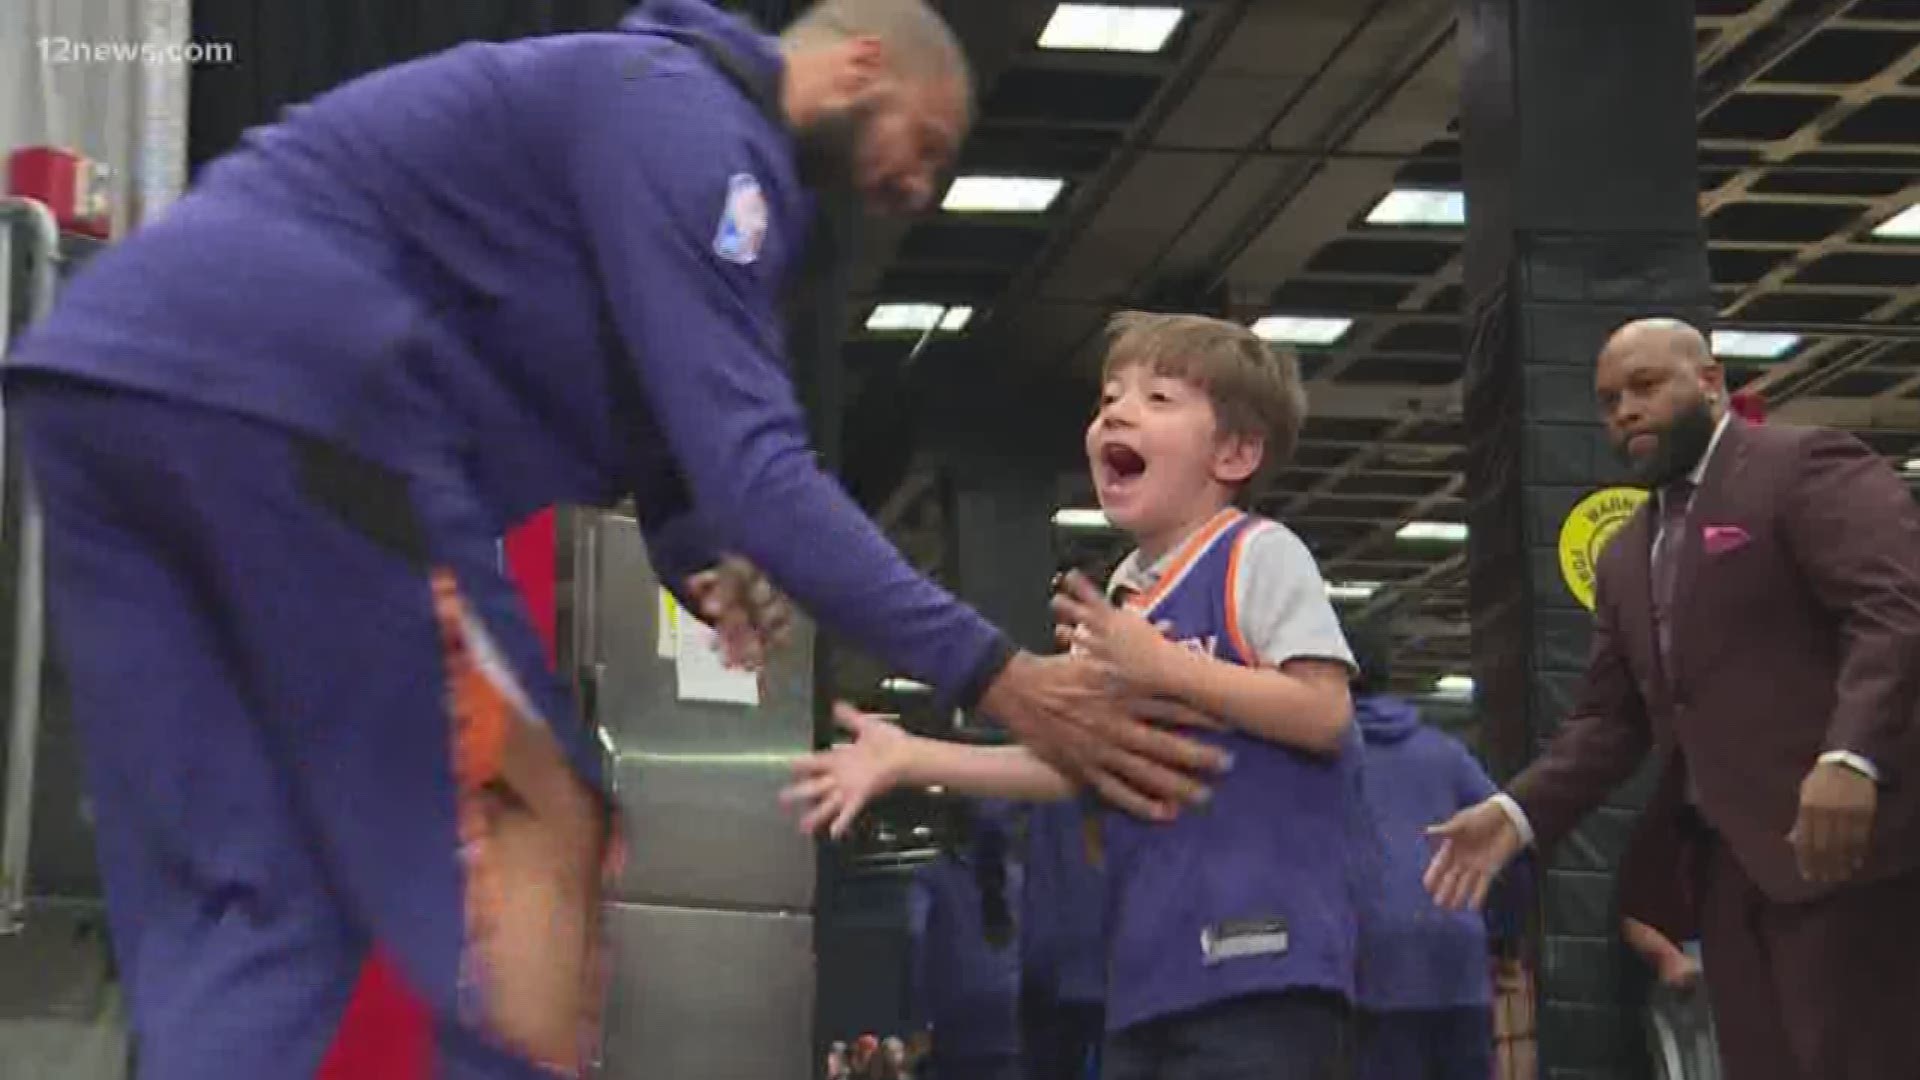 Teddy chose having a birthday party over going to Disneyland to celebrate his sixth birthday. When no one showed up his mom posted pictures of her sad son to Facebook. Well, the Phoenix Suns heard about Teddy and showered him with a few surprises today.